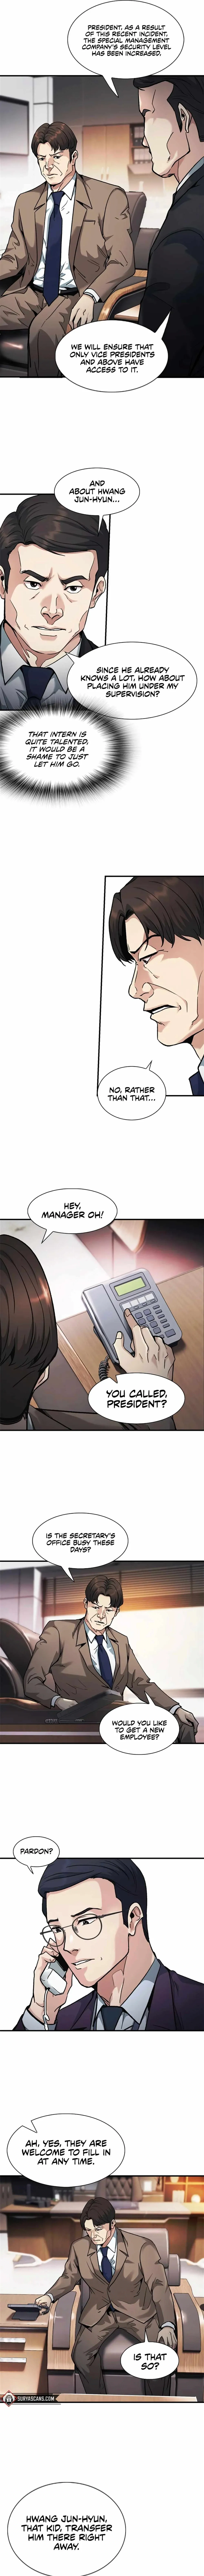 The New Employee Chairman Kang chapter 11